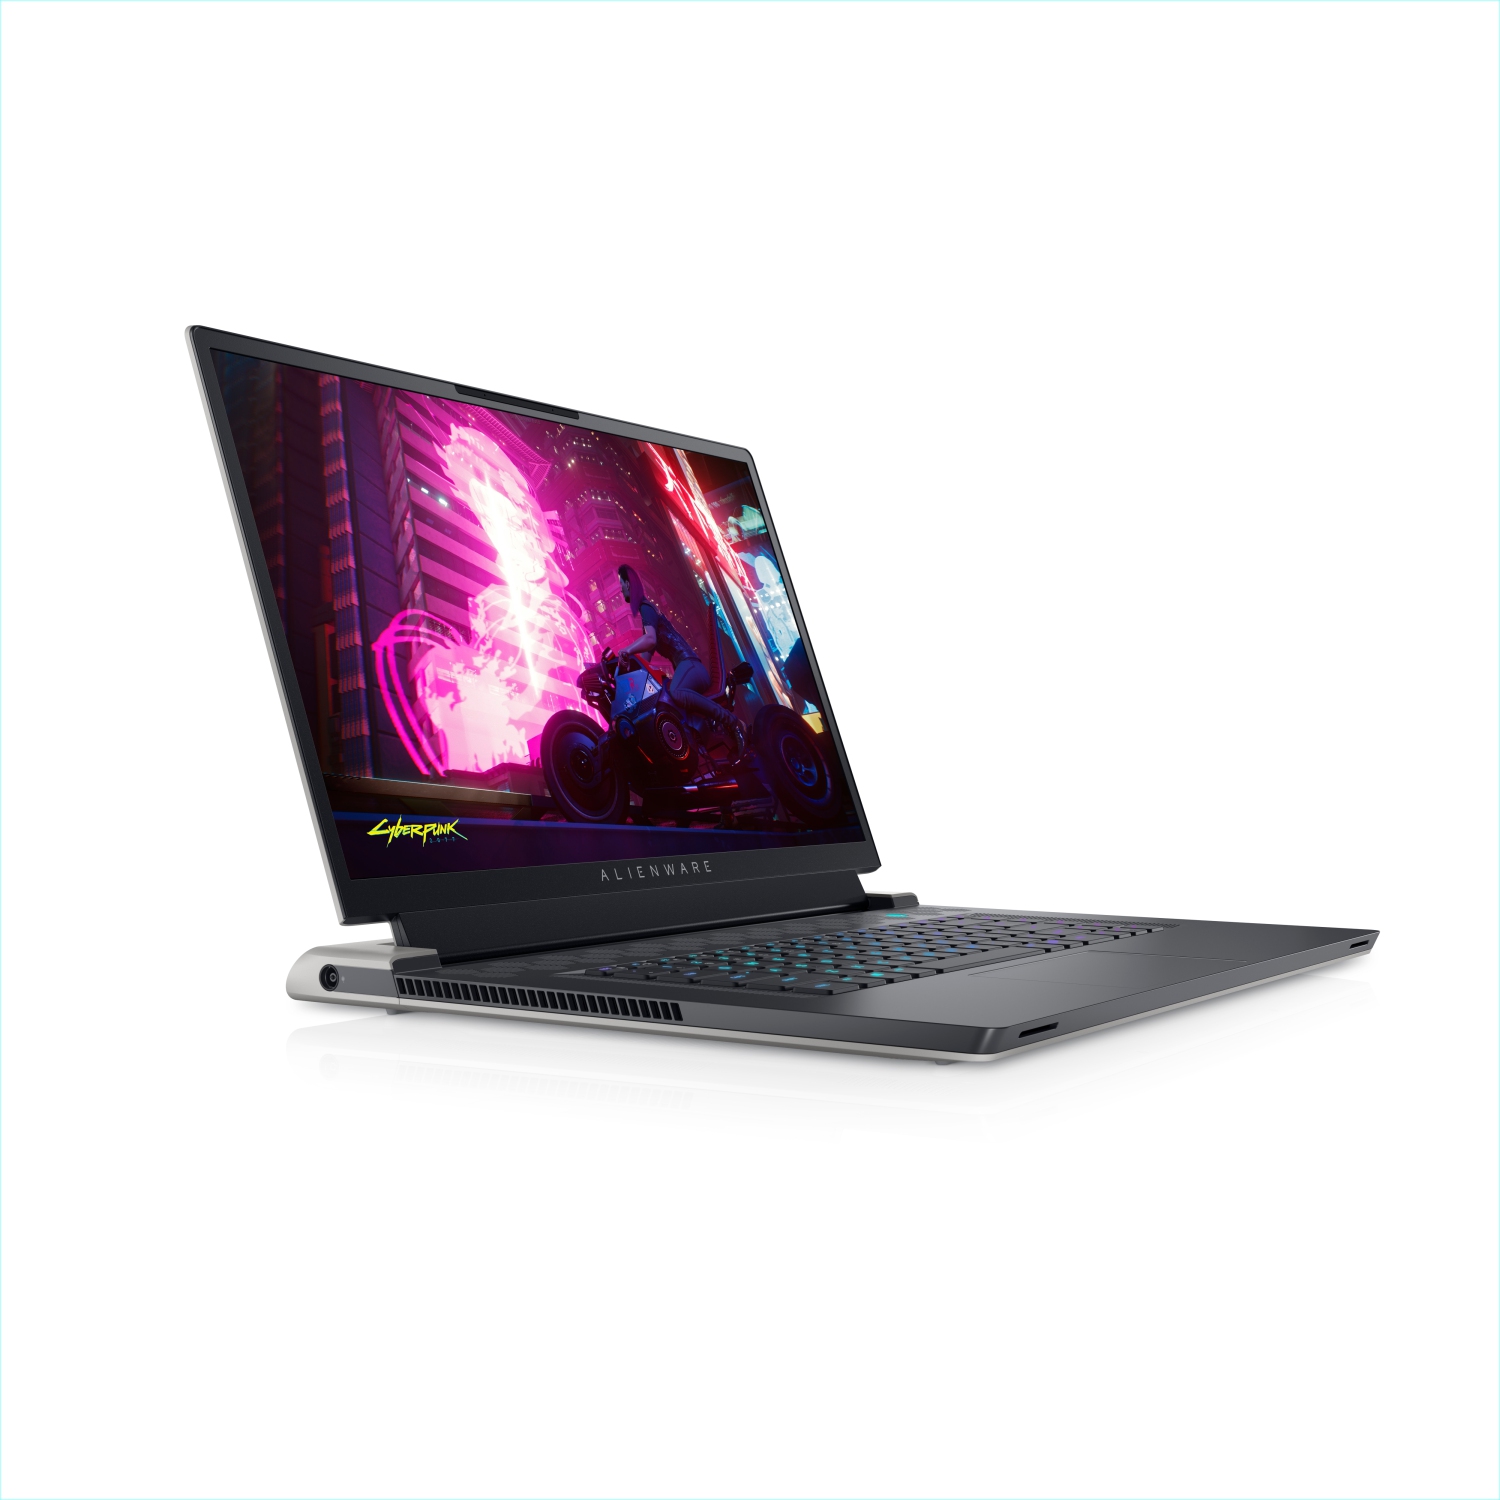 Refurbished (Excellent) – Dell Alienware X17 R1 Gaming Laptop (2021) | 17.3" FHD | Core i7 - 2TB SSD + 2TB SSD - 64GB RAM - RTX 3070 | 8 Cores @ 4.6 GHz - 11th Gen CPU - 8GB GDDR6